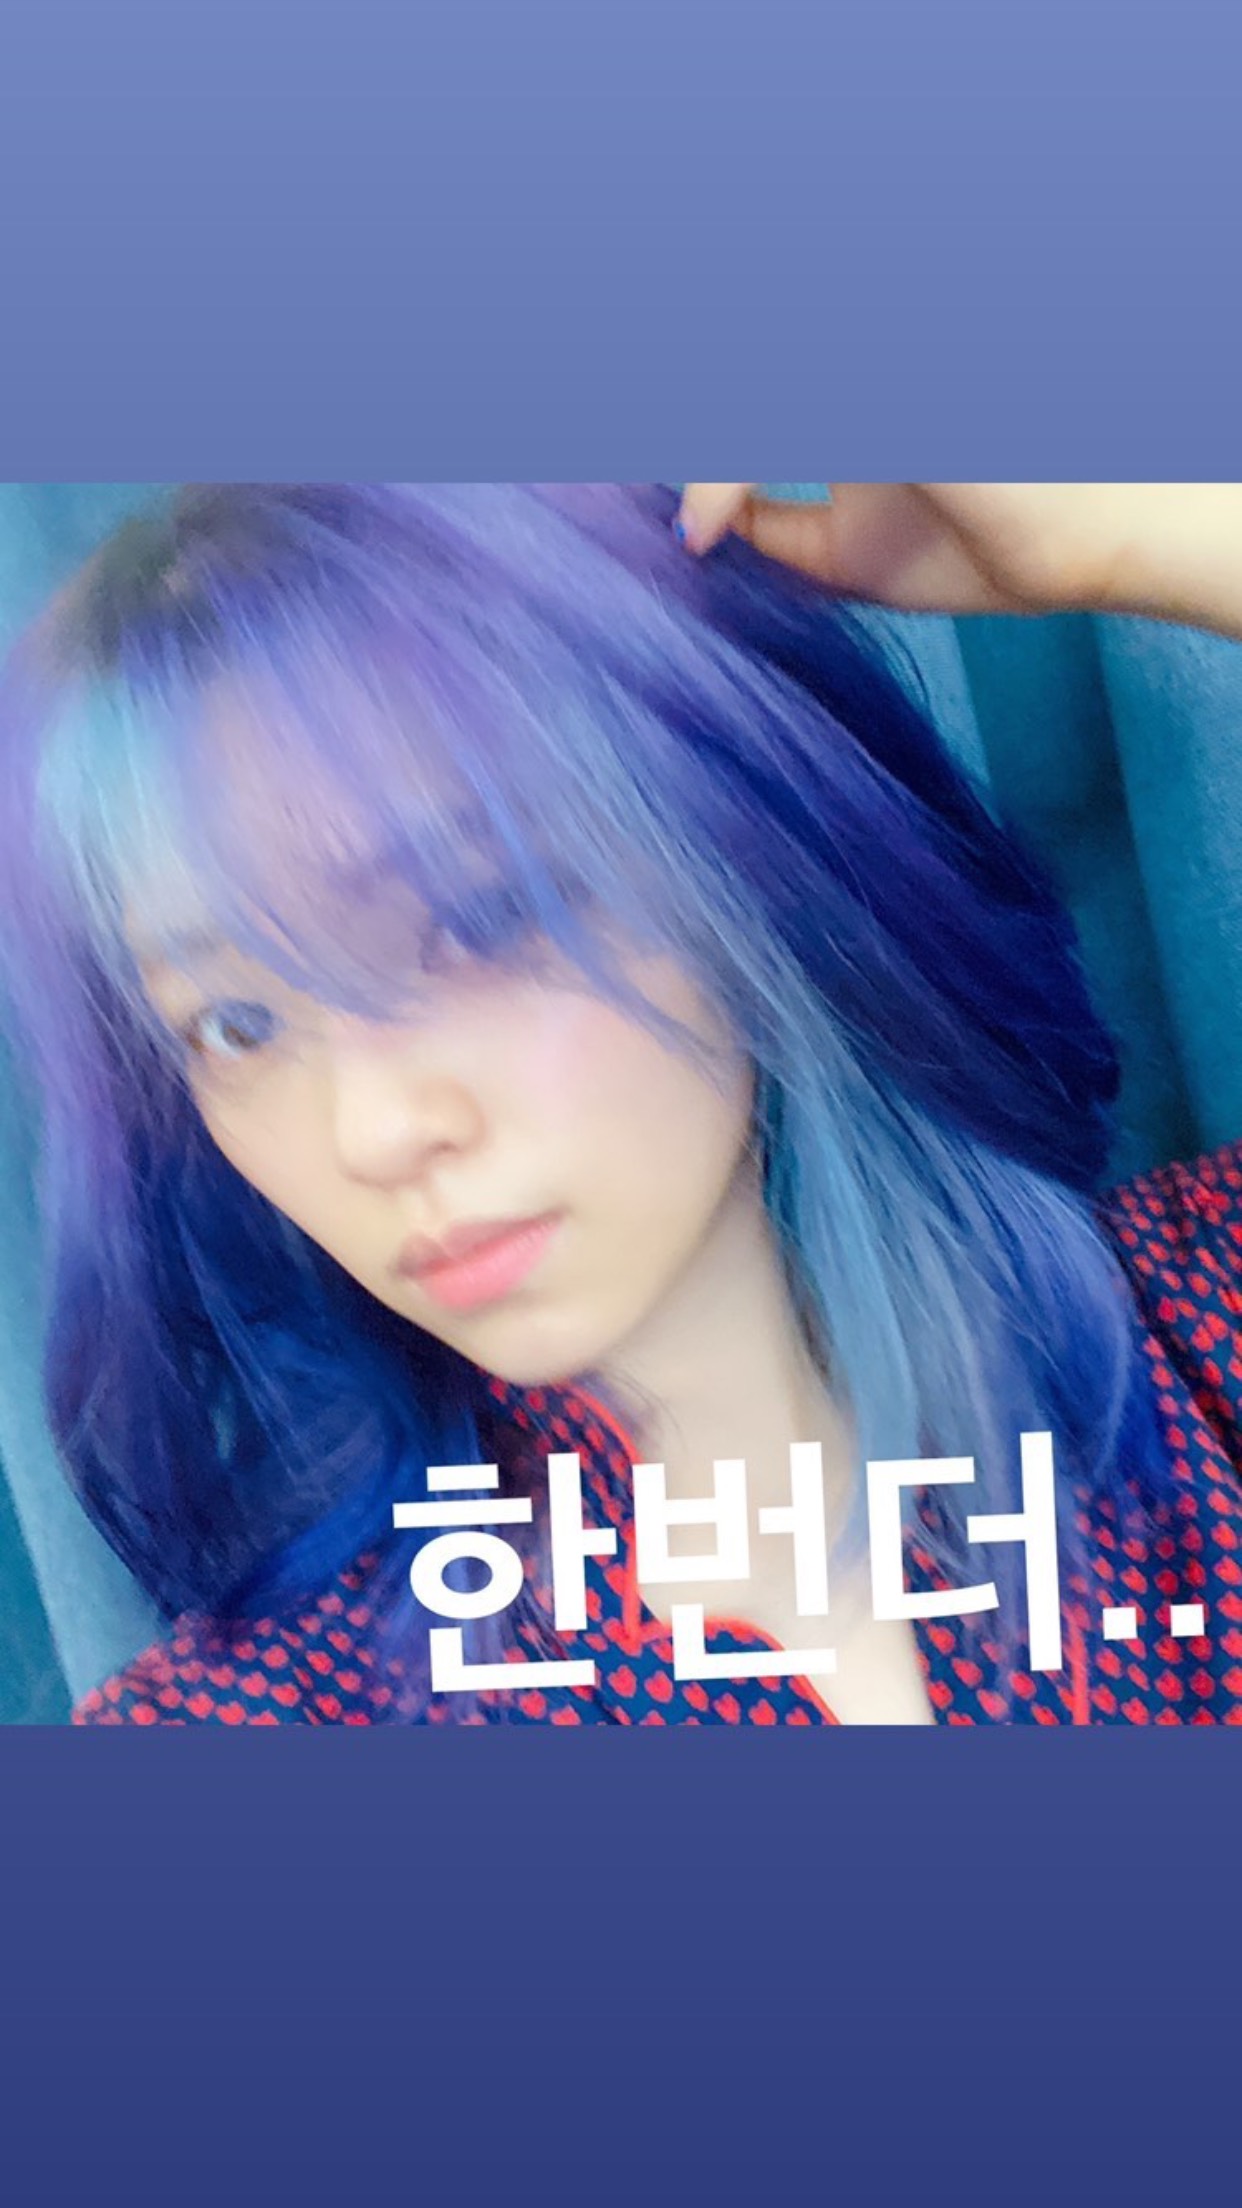 jeongyeon-twice-reveals-new-hairstyle-dyed-herself-2